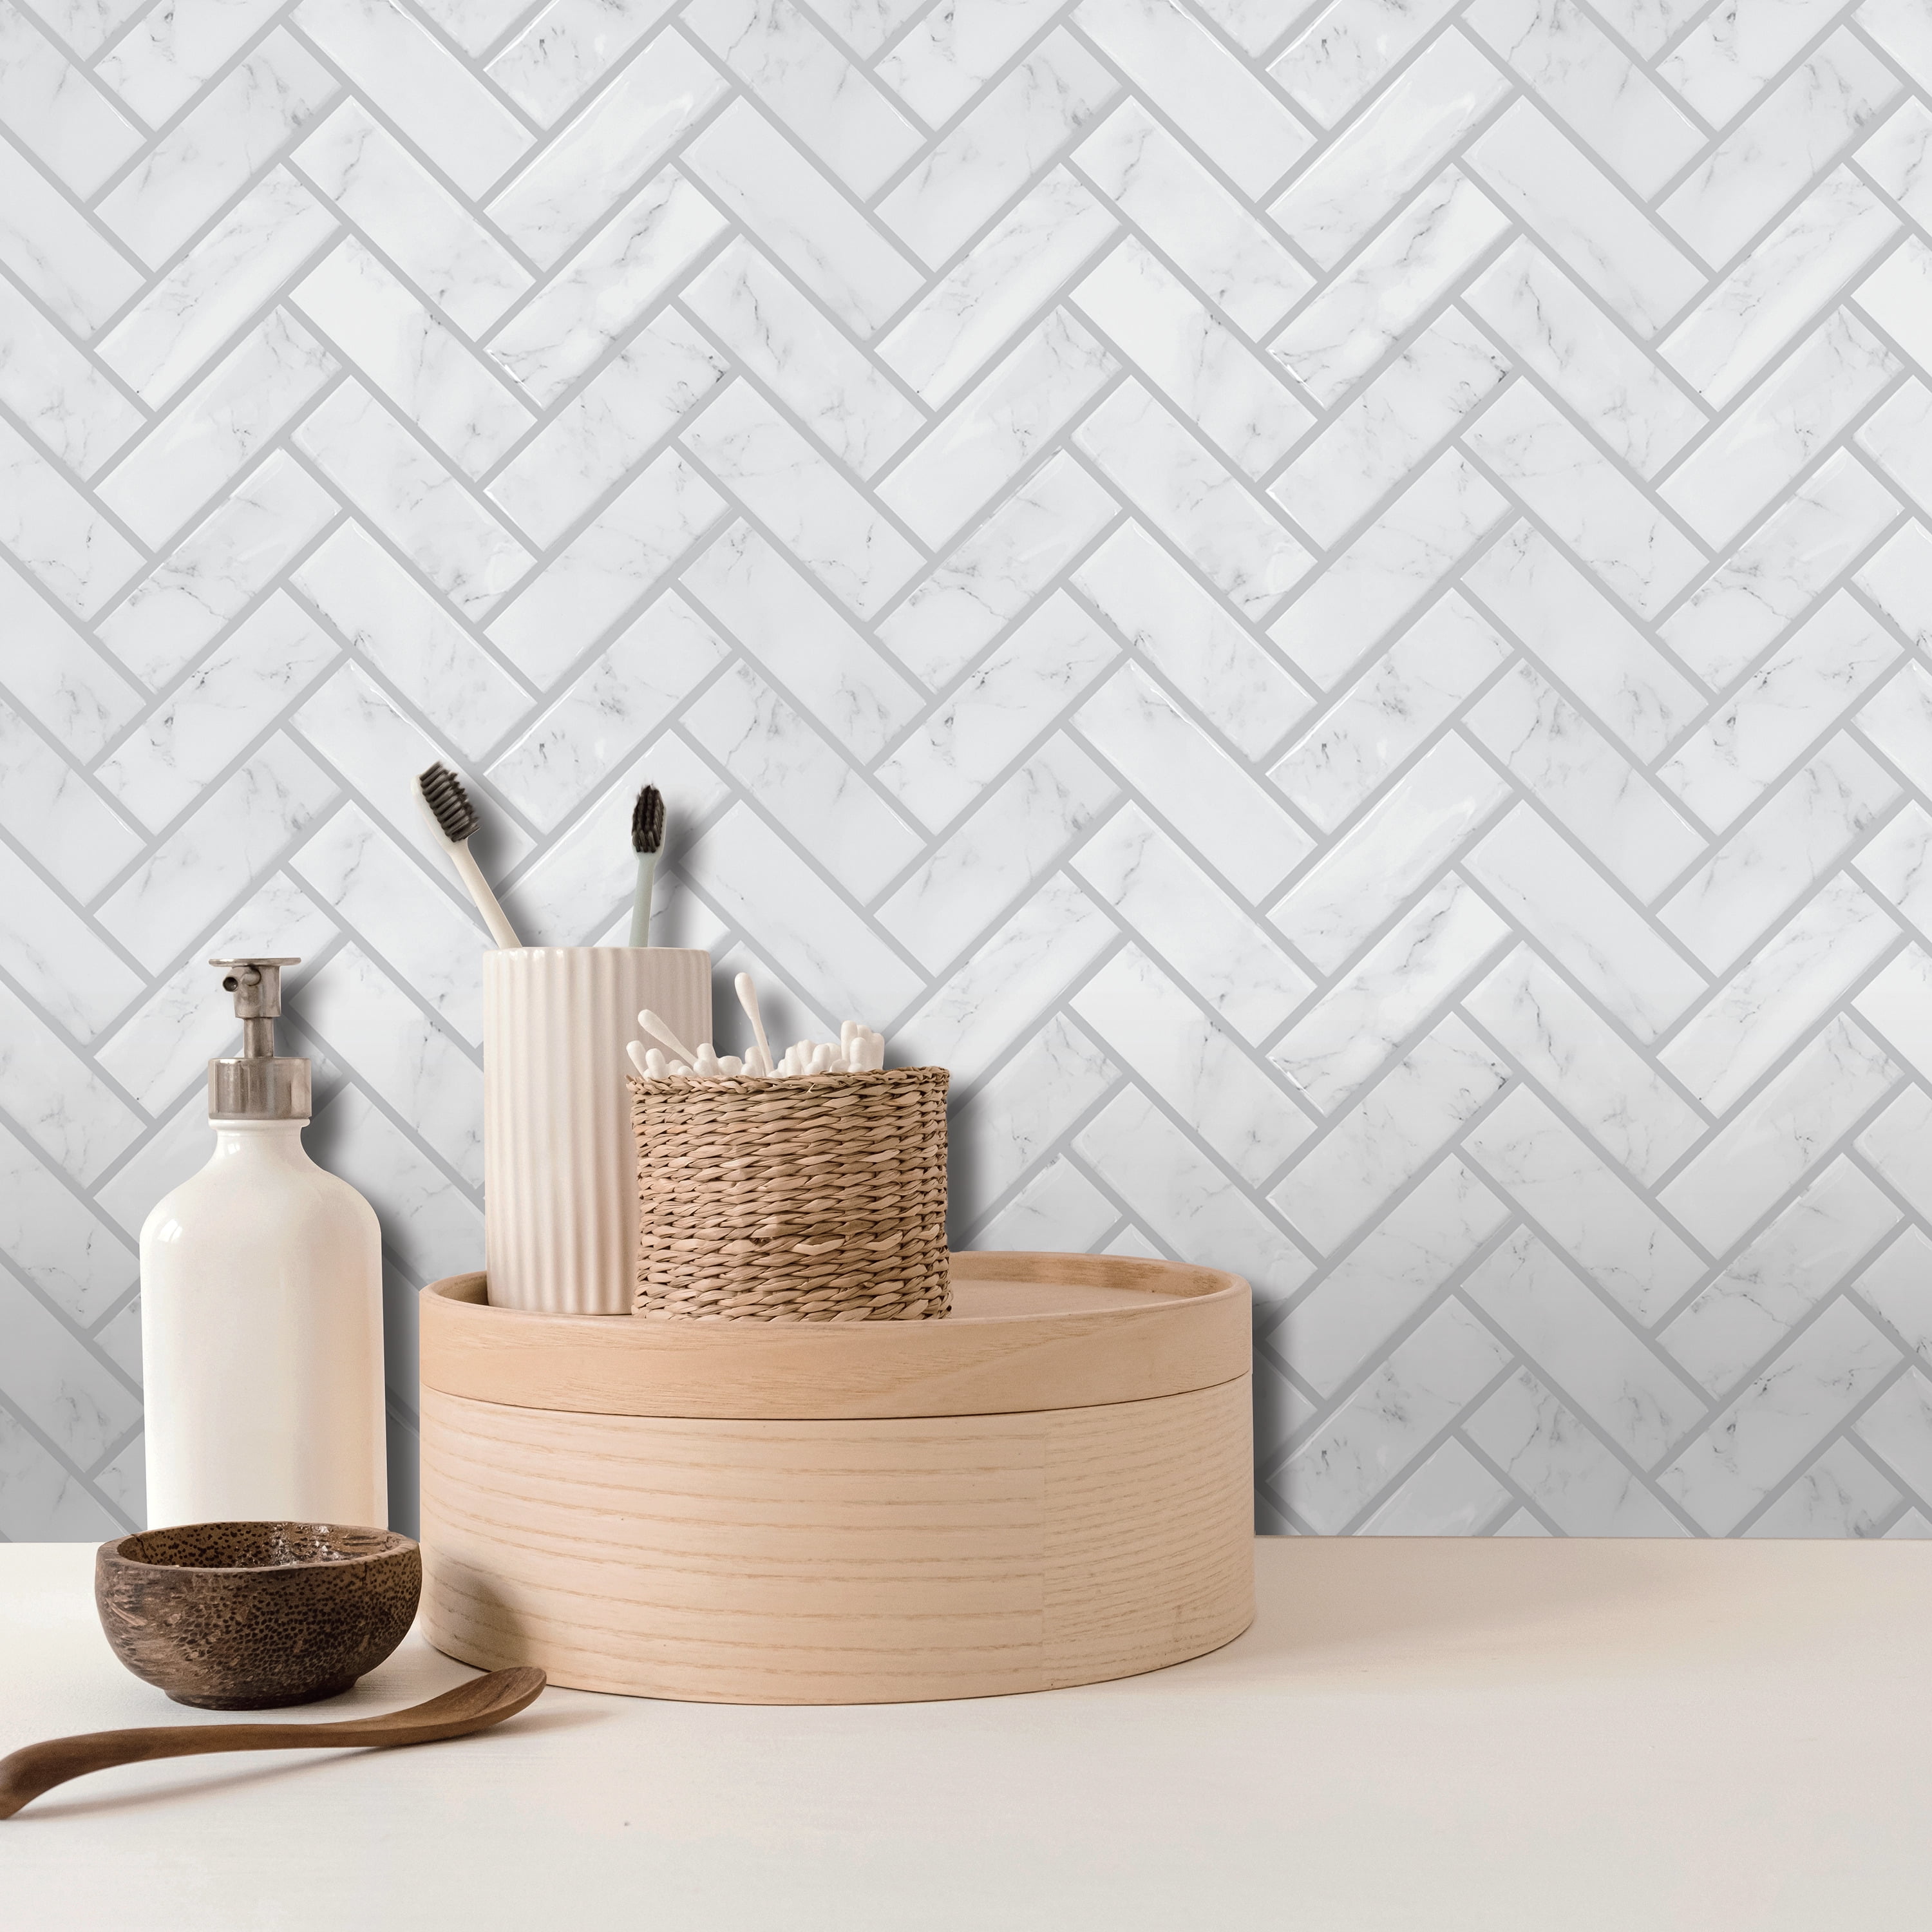 Marble Herringbone Peel And Stick Sticktile by RoomMates